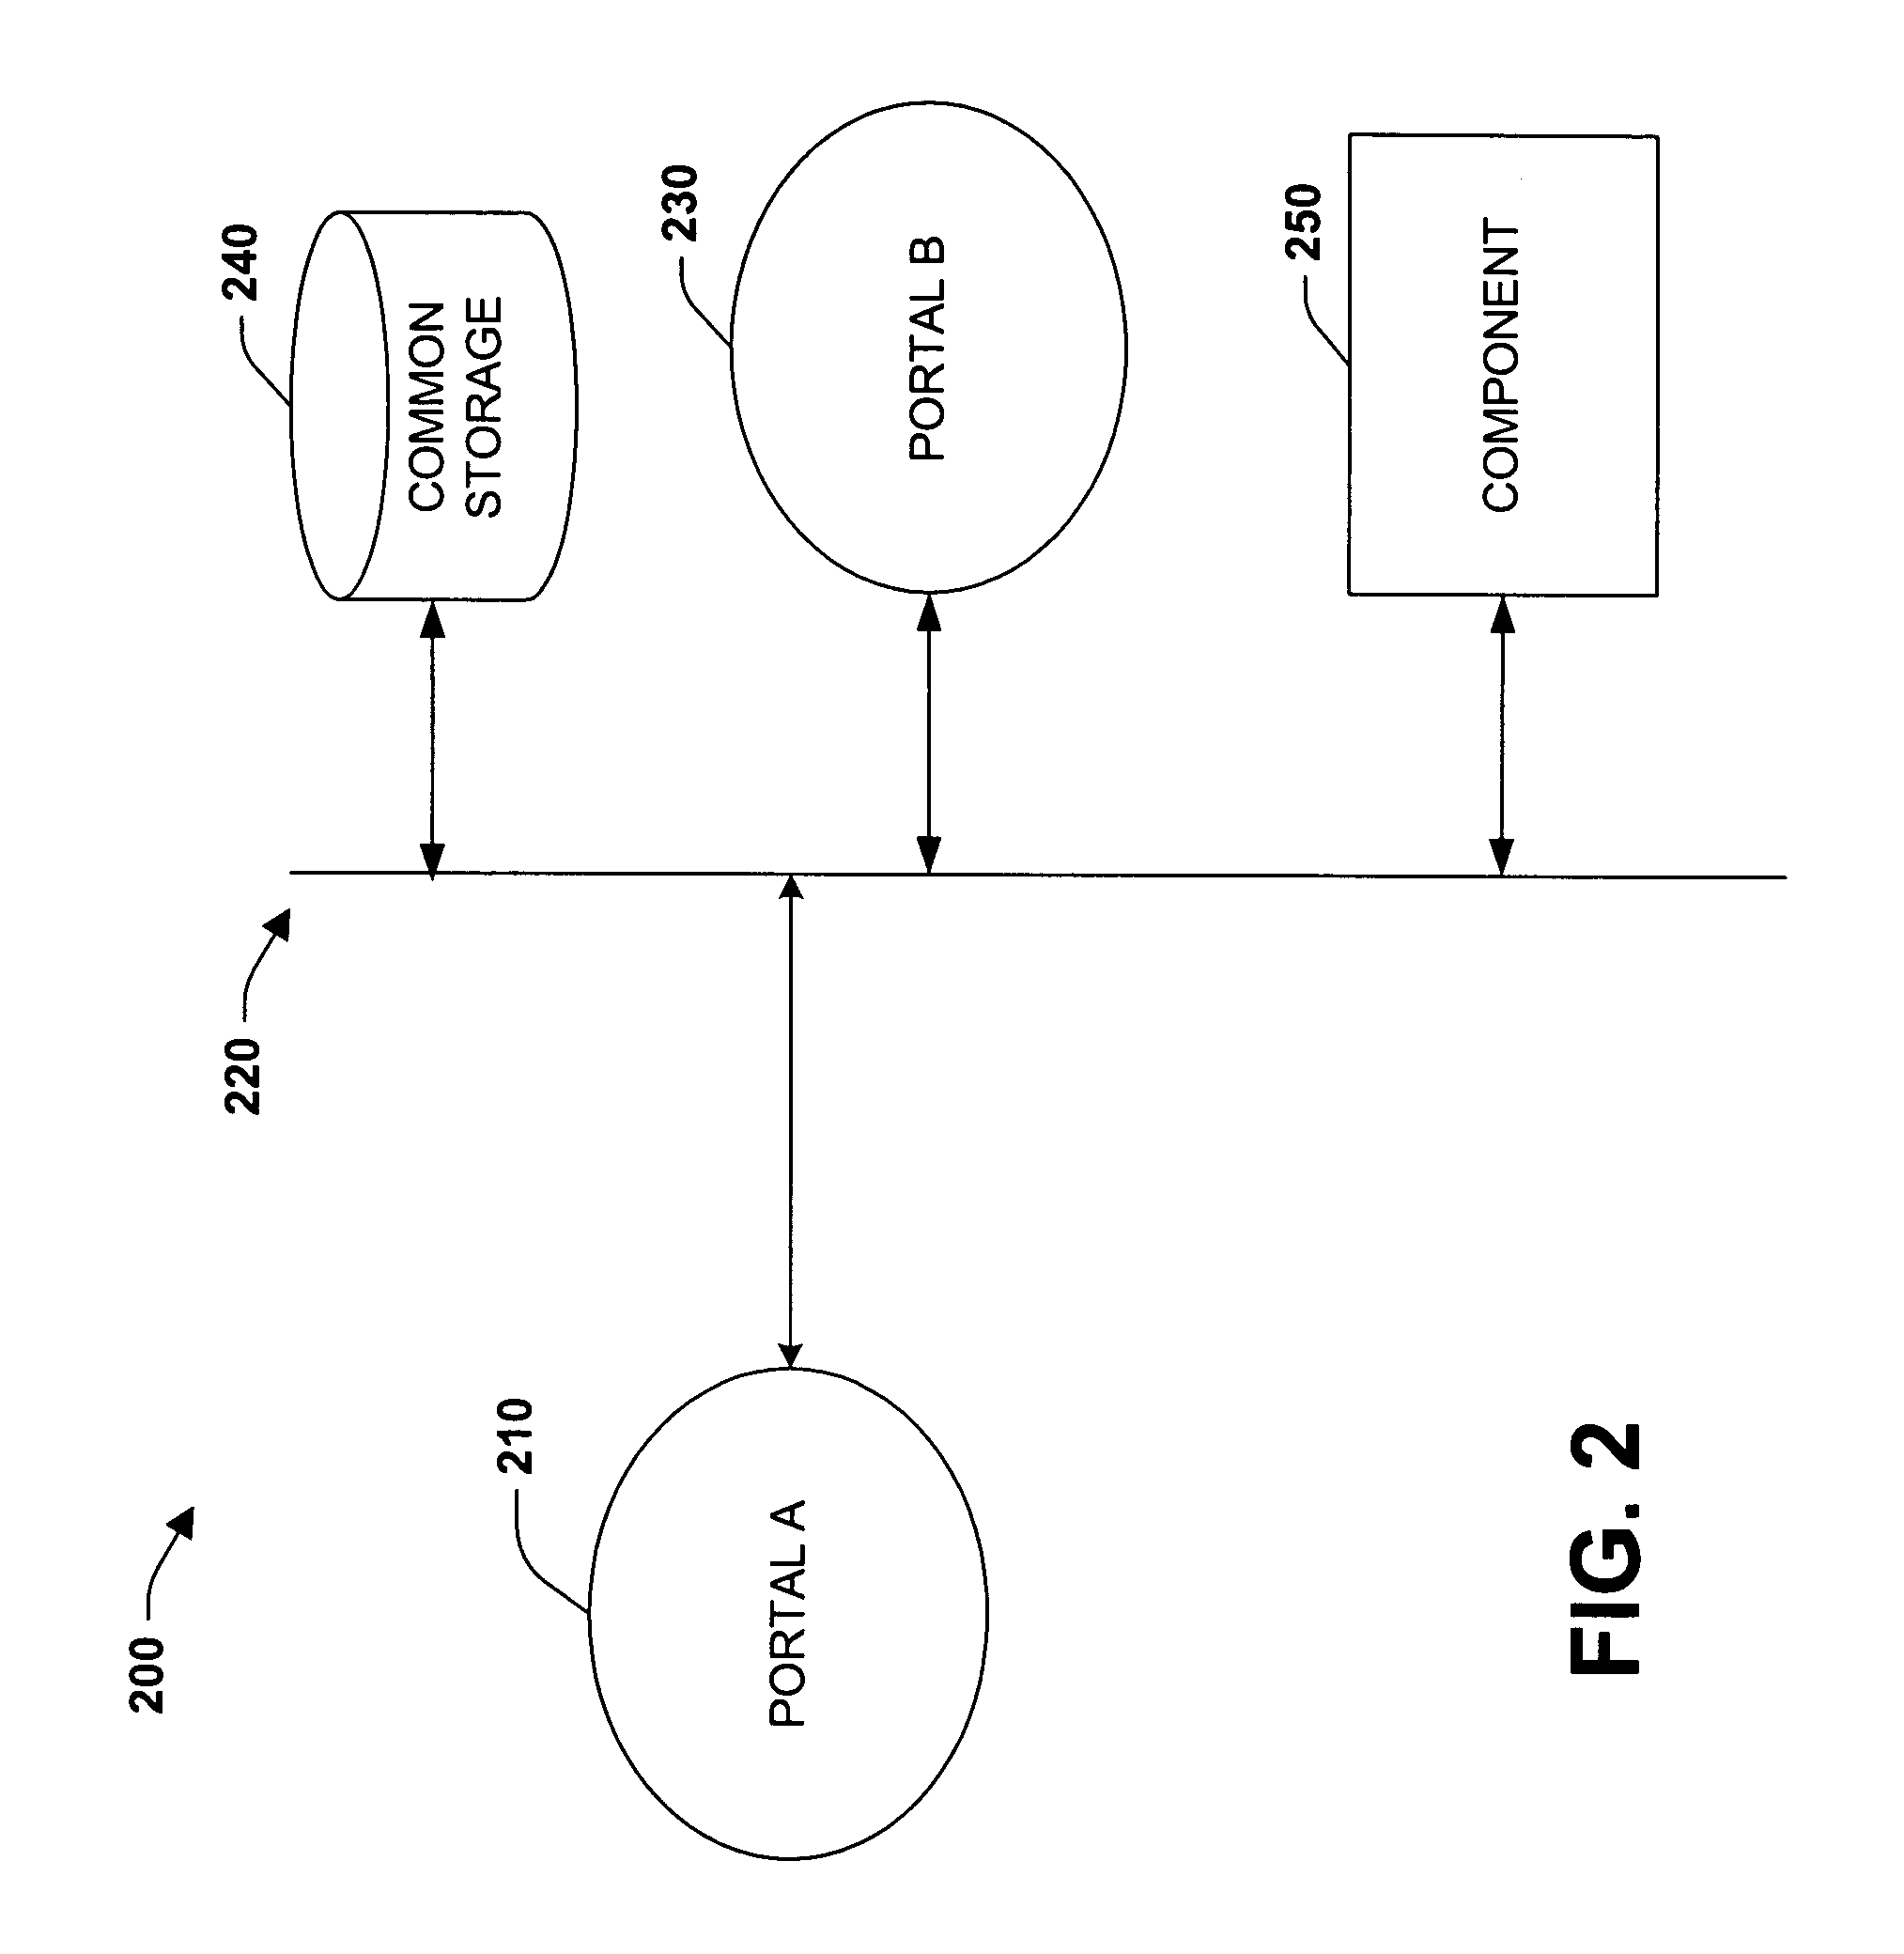 Systems and methods for sharing portal configurations